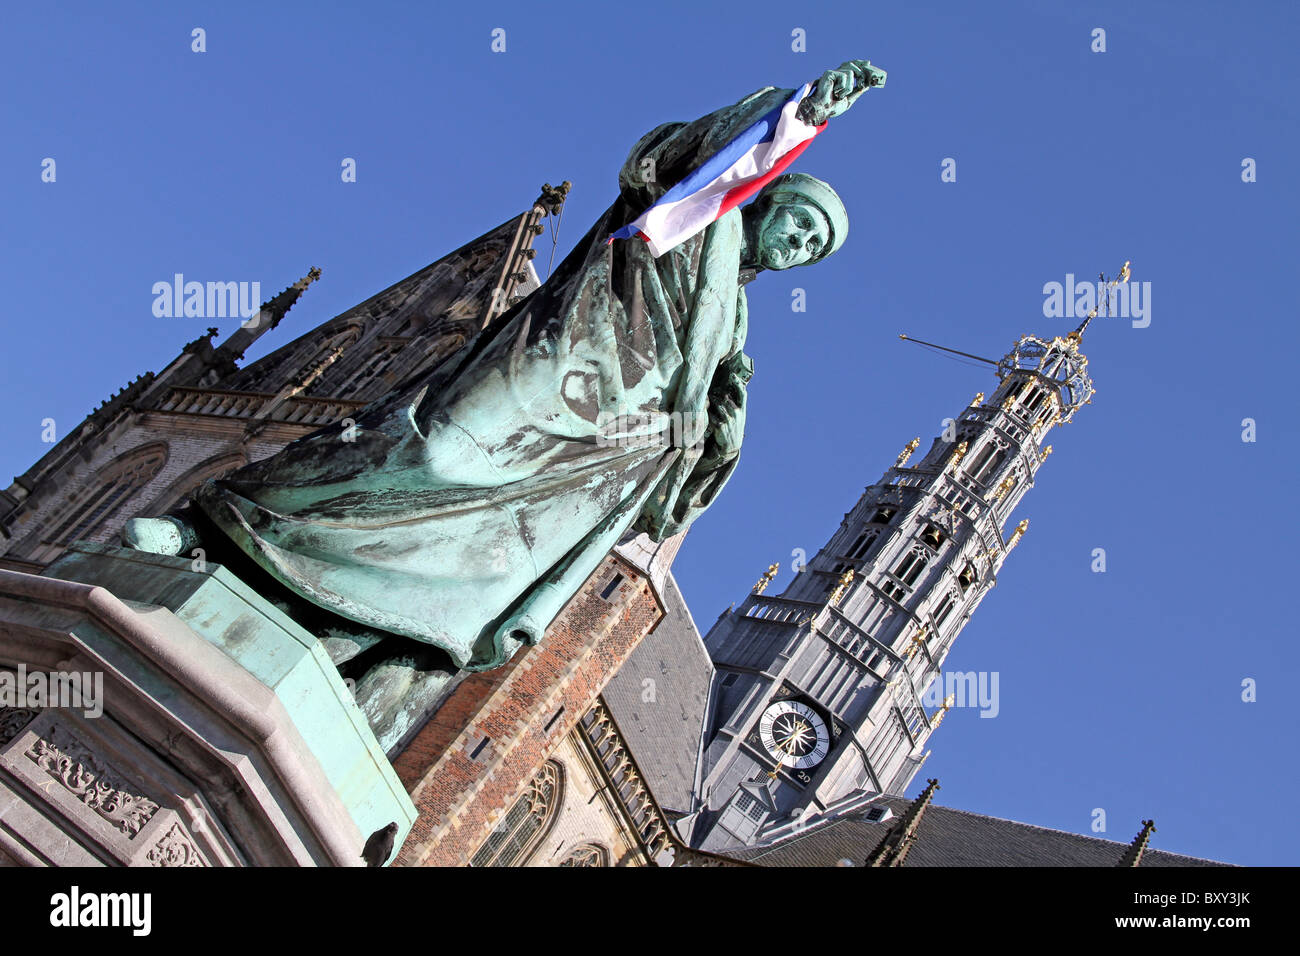 Statue of Laurens Janszoon Coster and the Grote Kerk or St. Balo Church in Haarlem, Holland Stock Photo